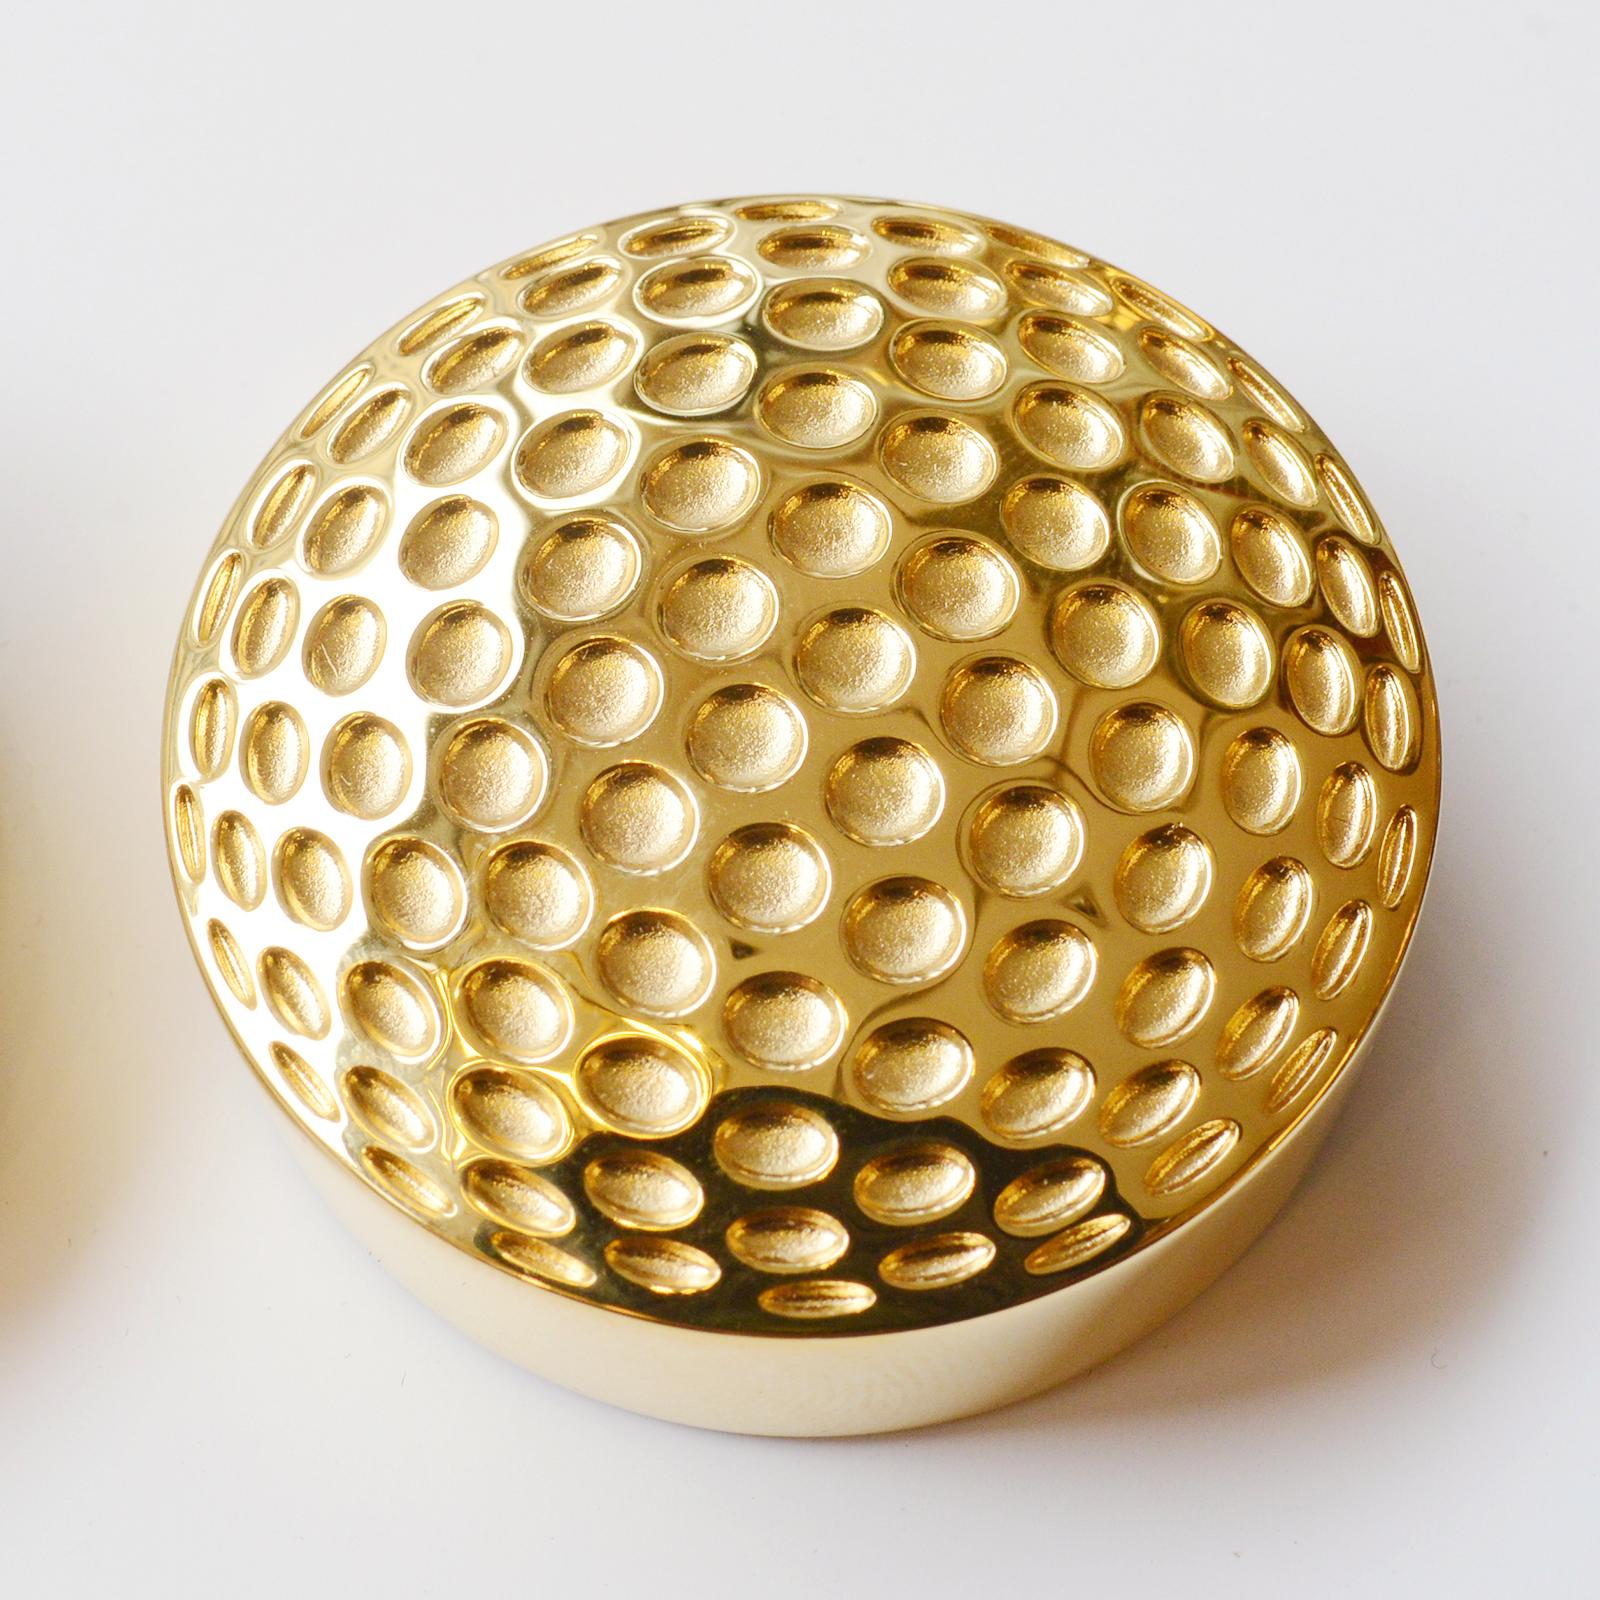 Paperweight golf gold made
entirely in solid brass in gold
finish with golf ball pattern.
Also available in palladium or ruthenium.